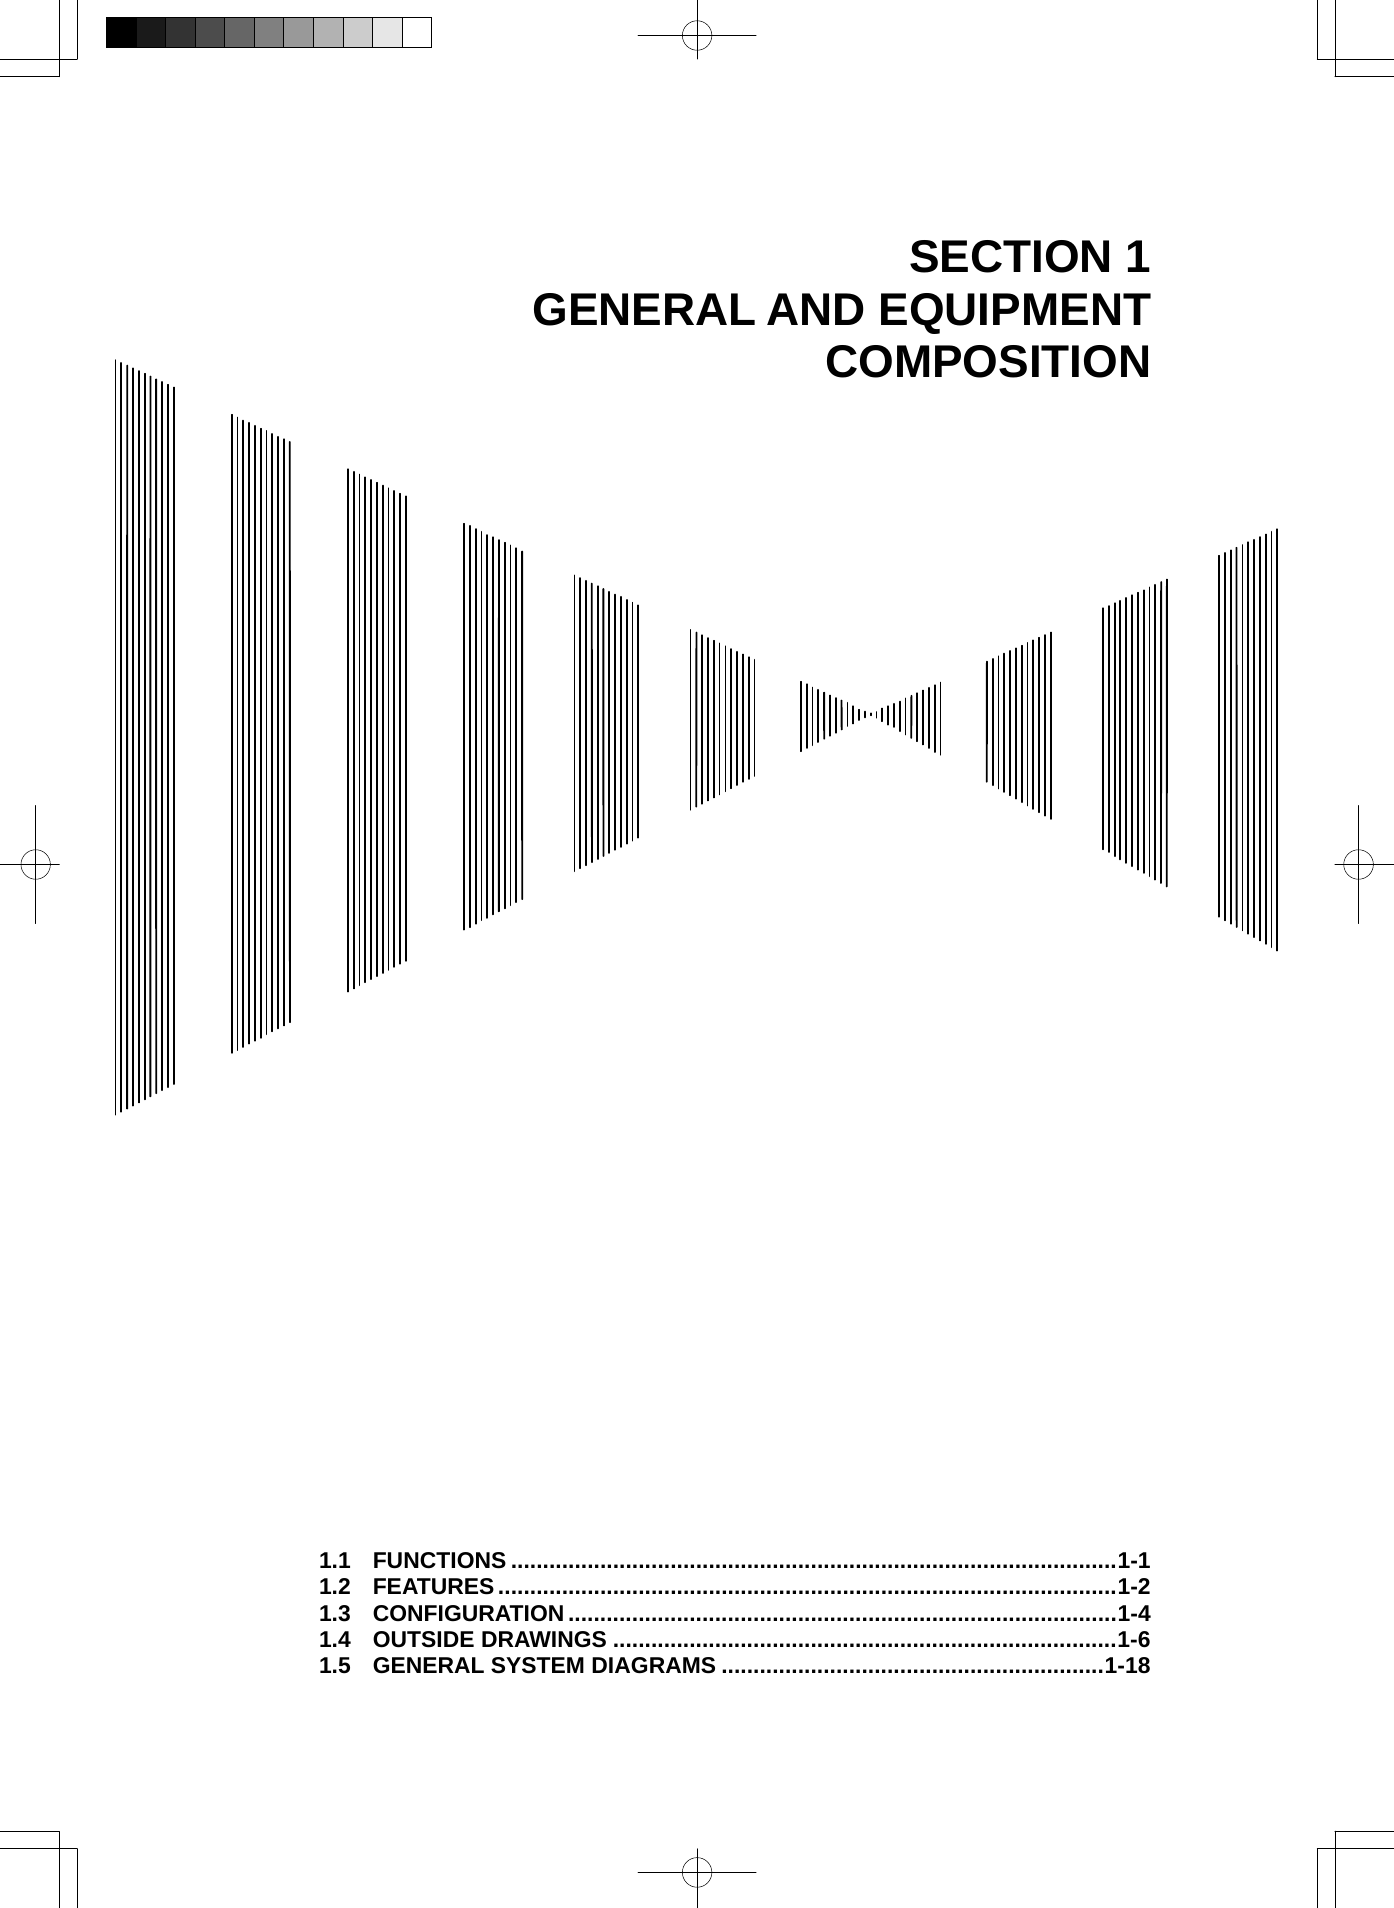   SECTION 1 GENERAL AND EQUIPMENT COMPOSITION                                            1.1 FUNCTIONS ...............................................................................................1-1 1.2 FEATURES .................................................................................................1-2 1.3 CONFIGURATION ......................................................................................1-4 1.4 OUTSIDE DRAWINGS ...............................................................................1-6 1.5 GENERAL SYSTEM DIAGRAMS ............................................................1-18 